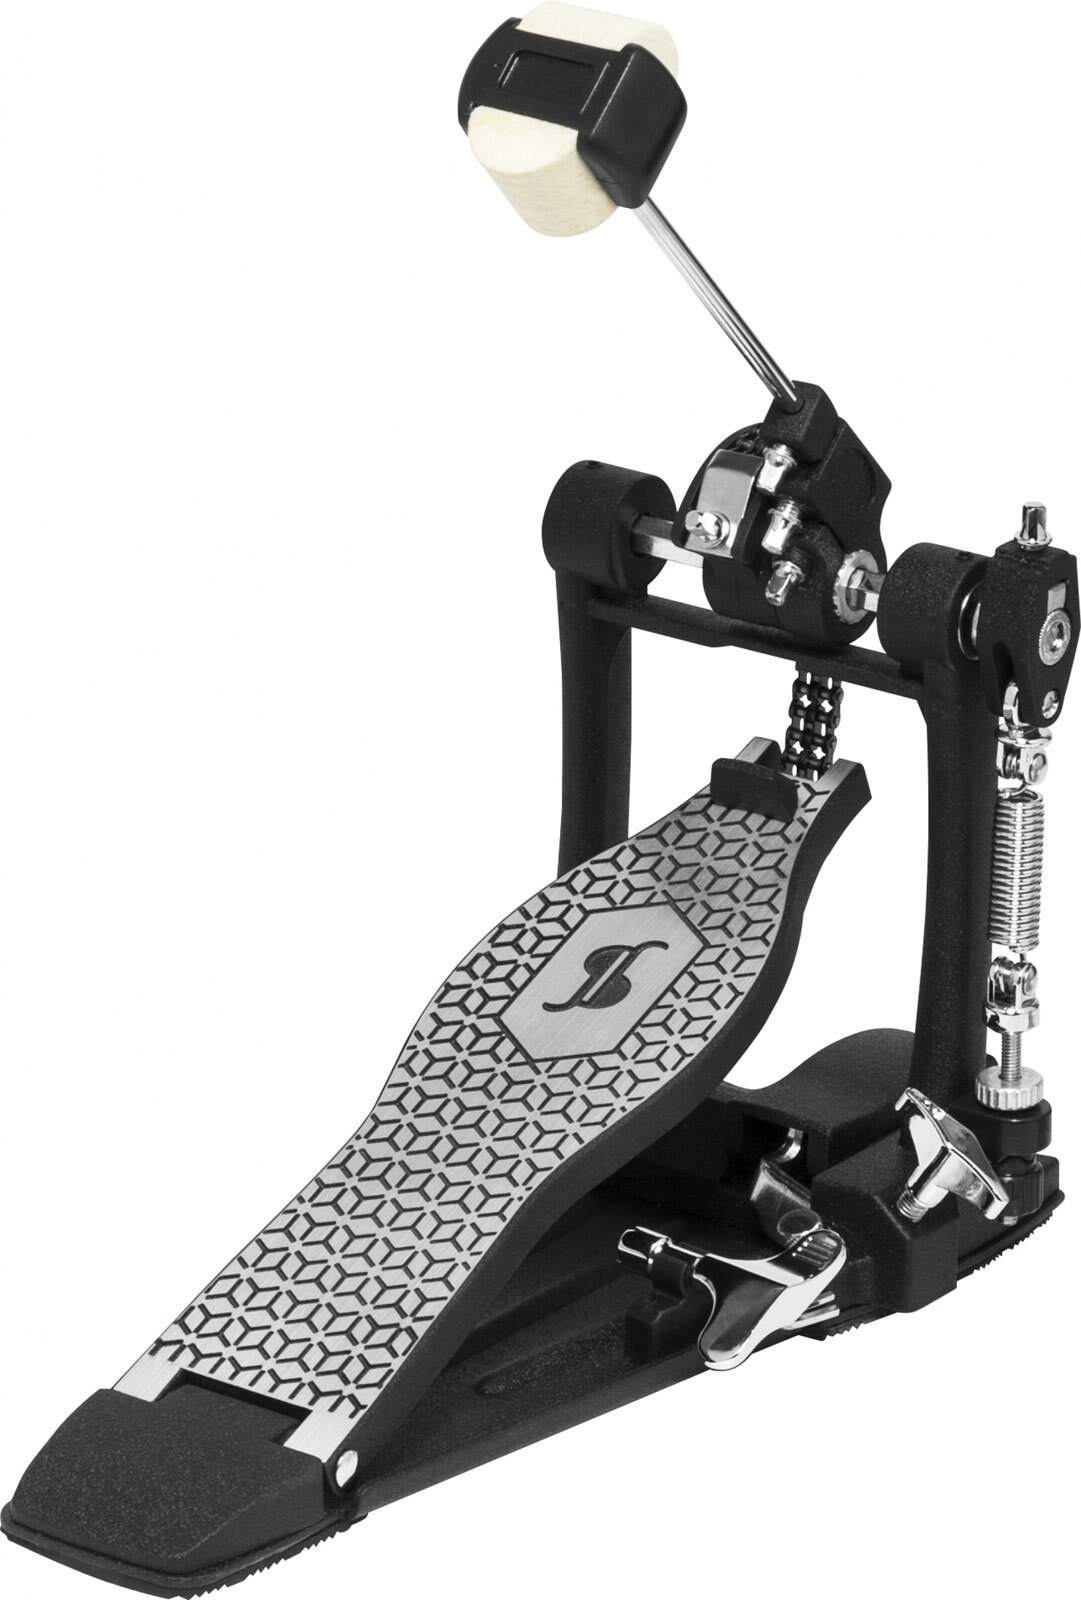 Stagg Pp-52 - Bass drum pedal - Main picture